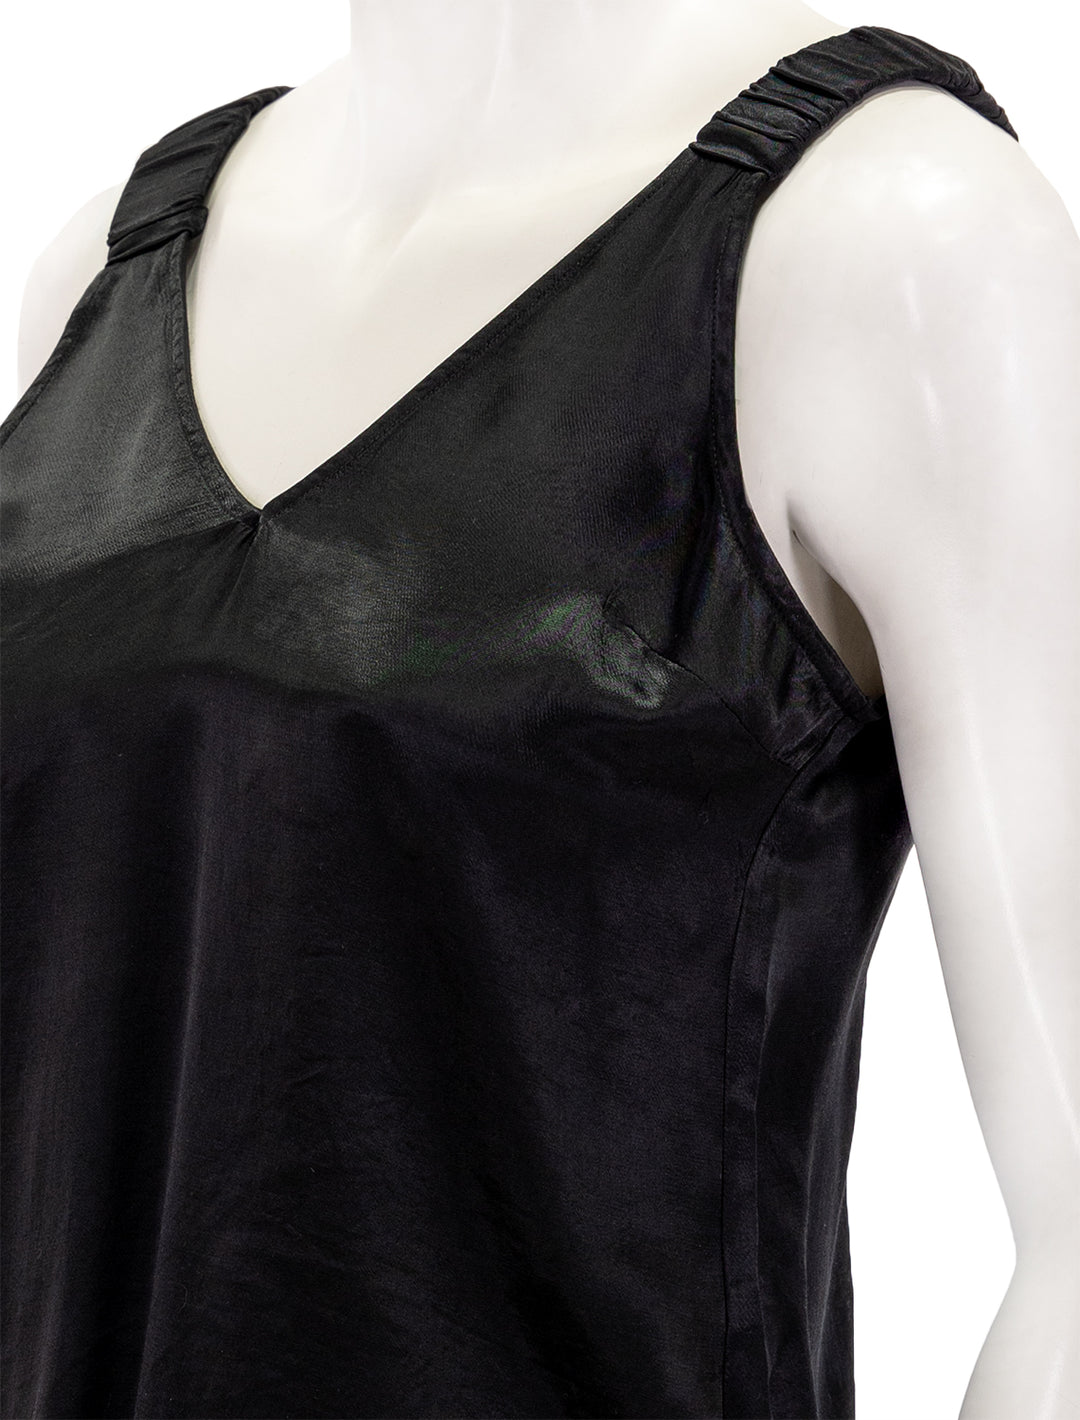 Close-up view of Nation LTD.'s kyle tank with elastic detail in black.